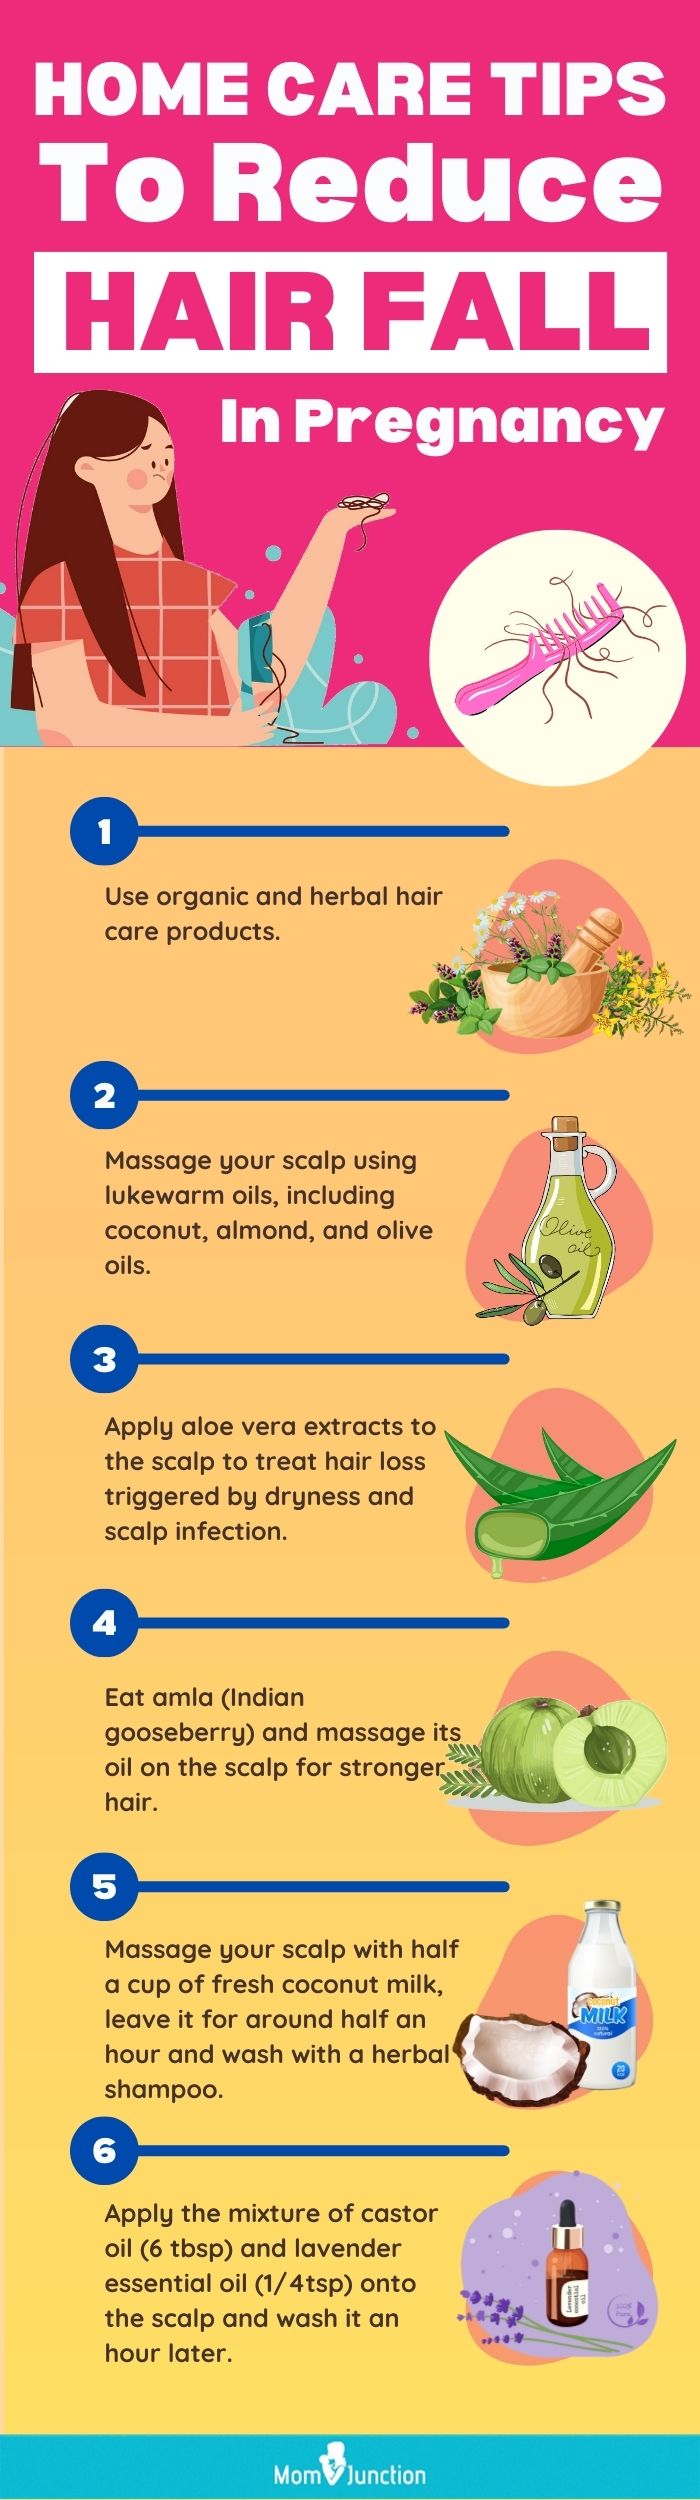 home care tips to reduce hair fall in pregnancy (infographic)